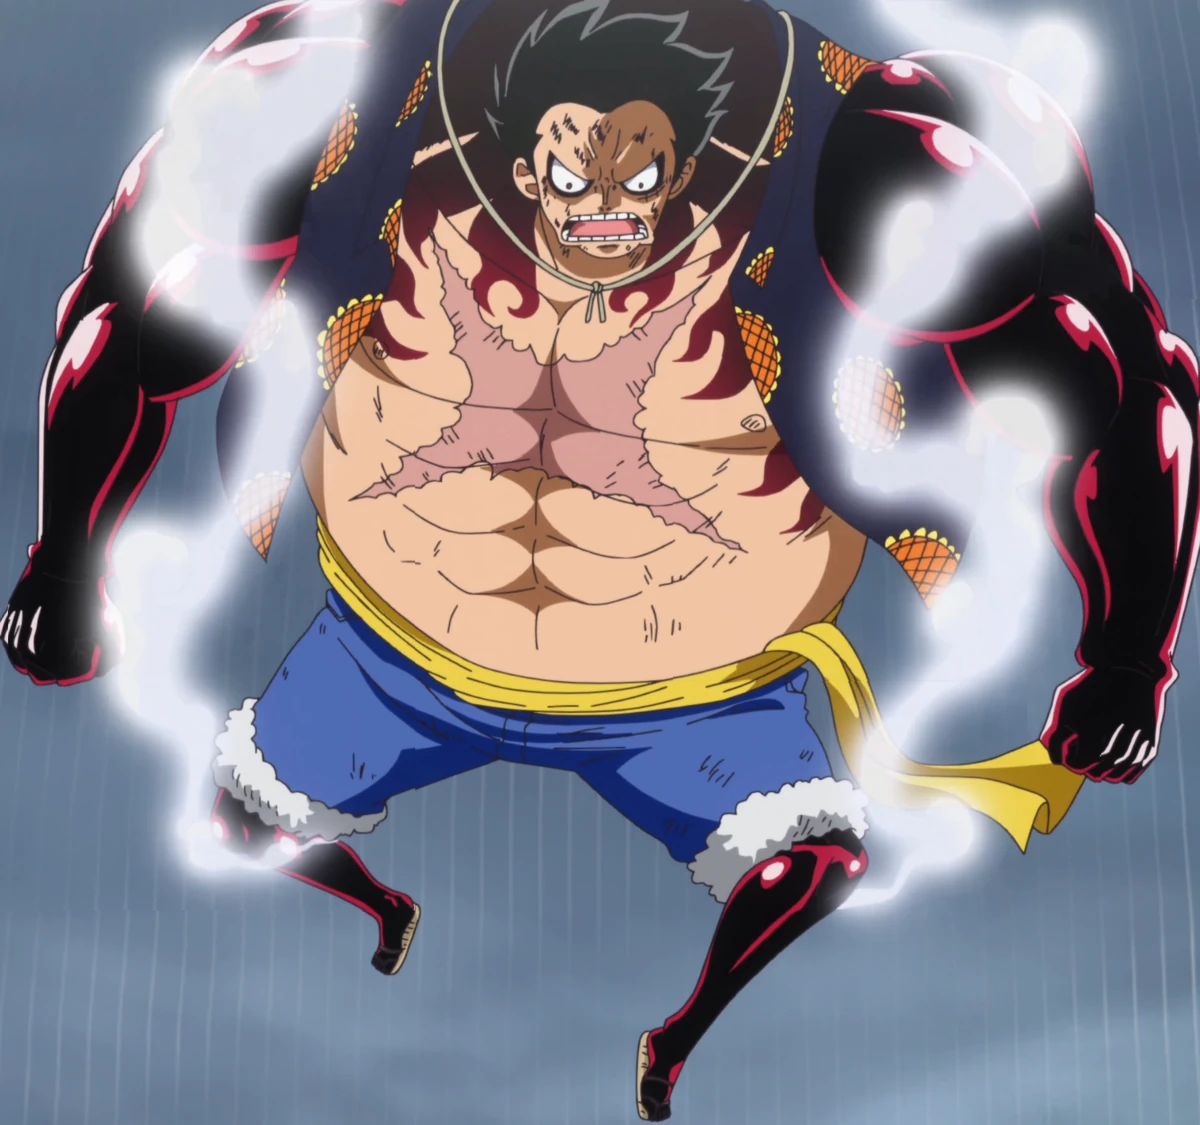 How To Get Gear 5 In A One Piece Game